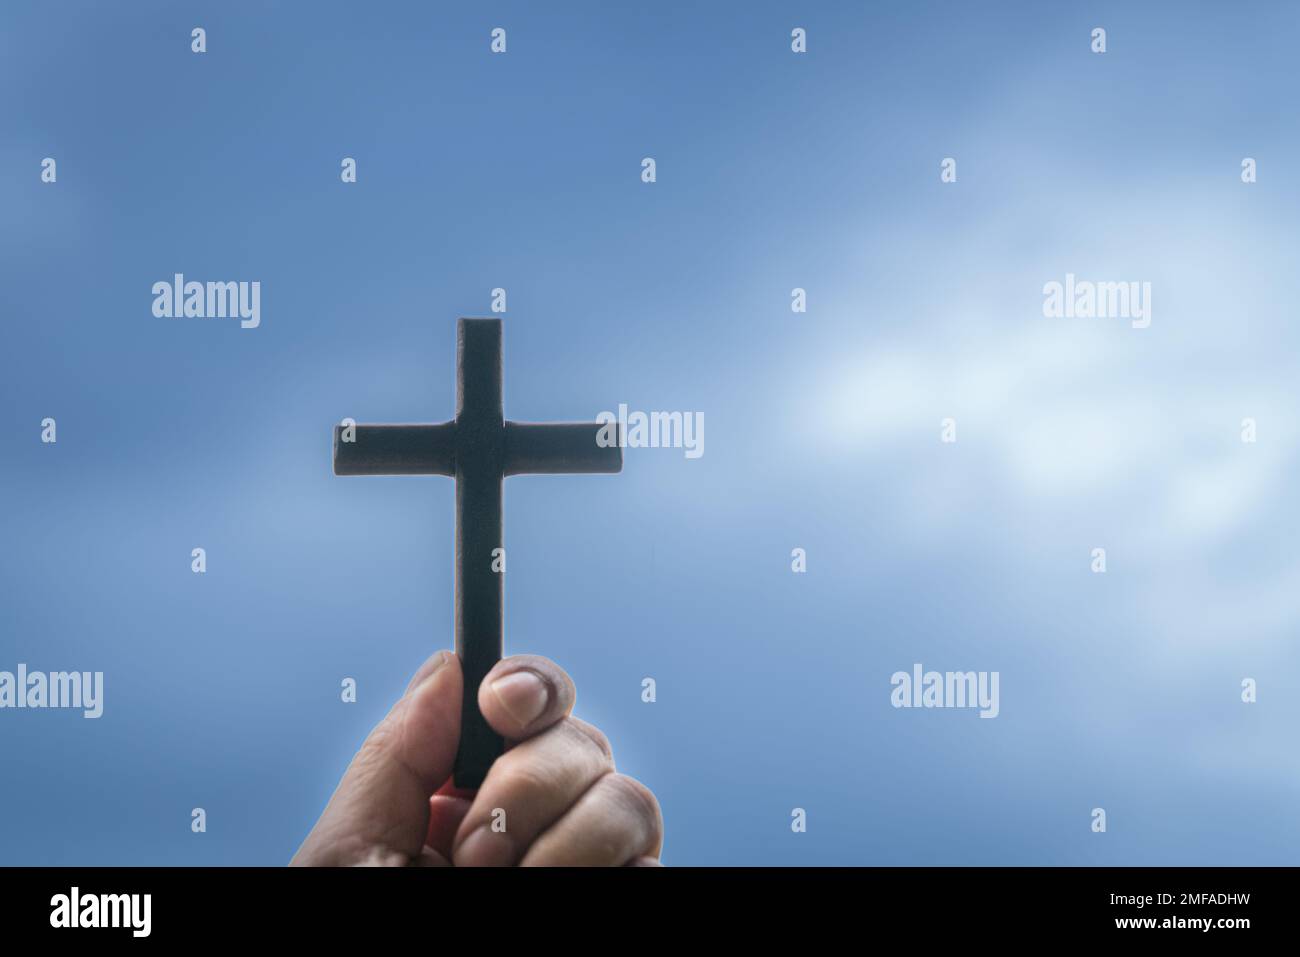 Good friday background hi-res stock photography and images - Alamy